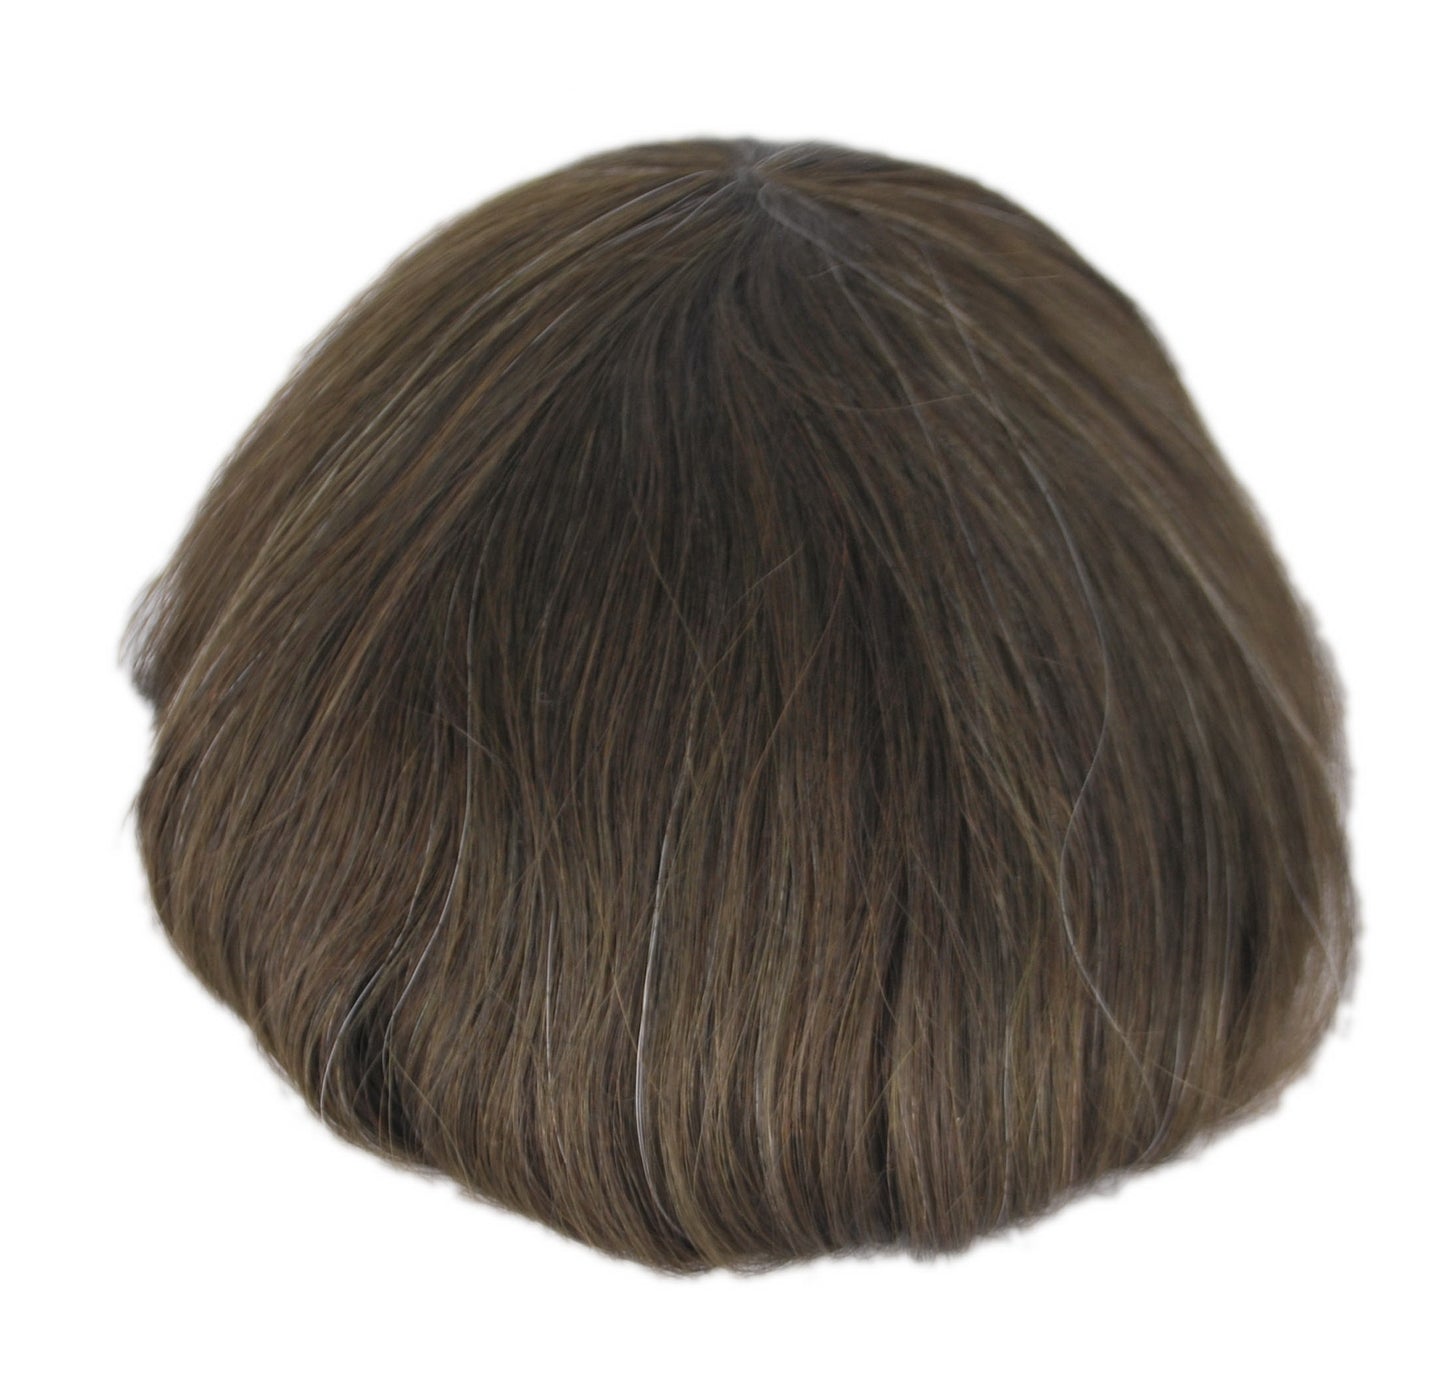 Ash Brown #310 Toupee With Grey Hair Hair System For Men Lace With PU Hair Replacement